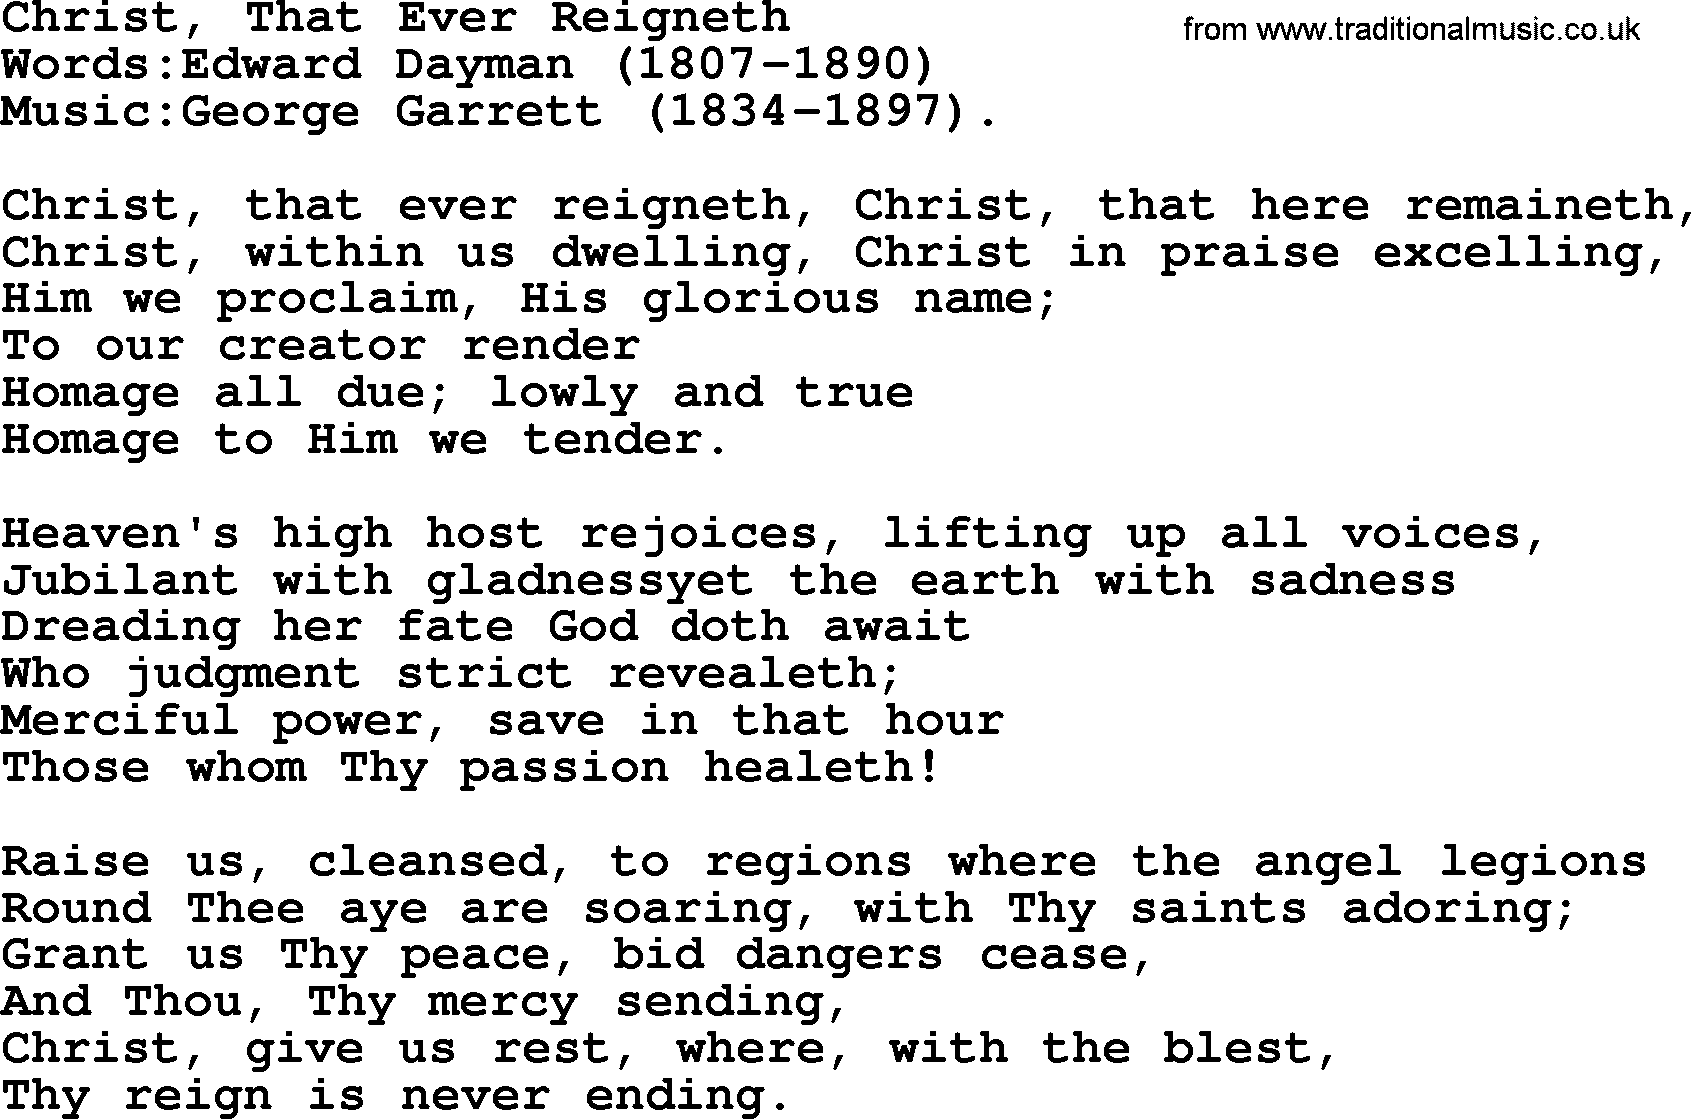 Christian hymns and songs about Jesus' Return(The Second Coming): Christ, That Ever Reigneth, lyrics with PDF